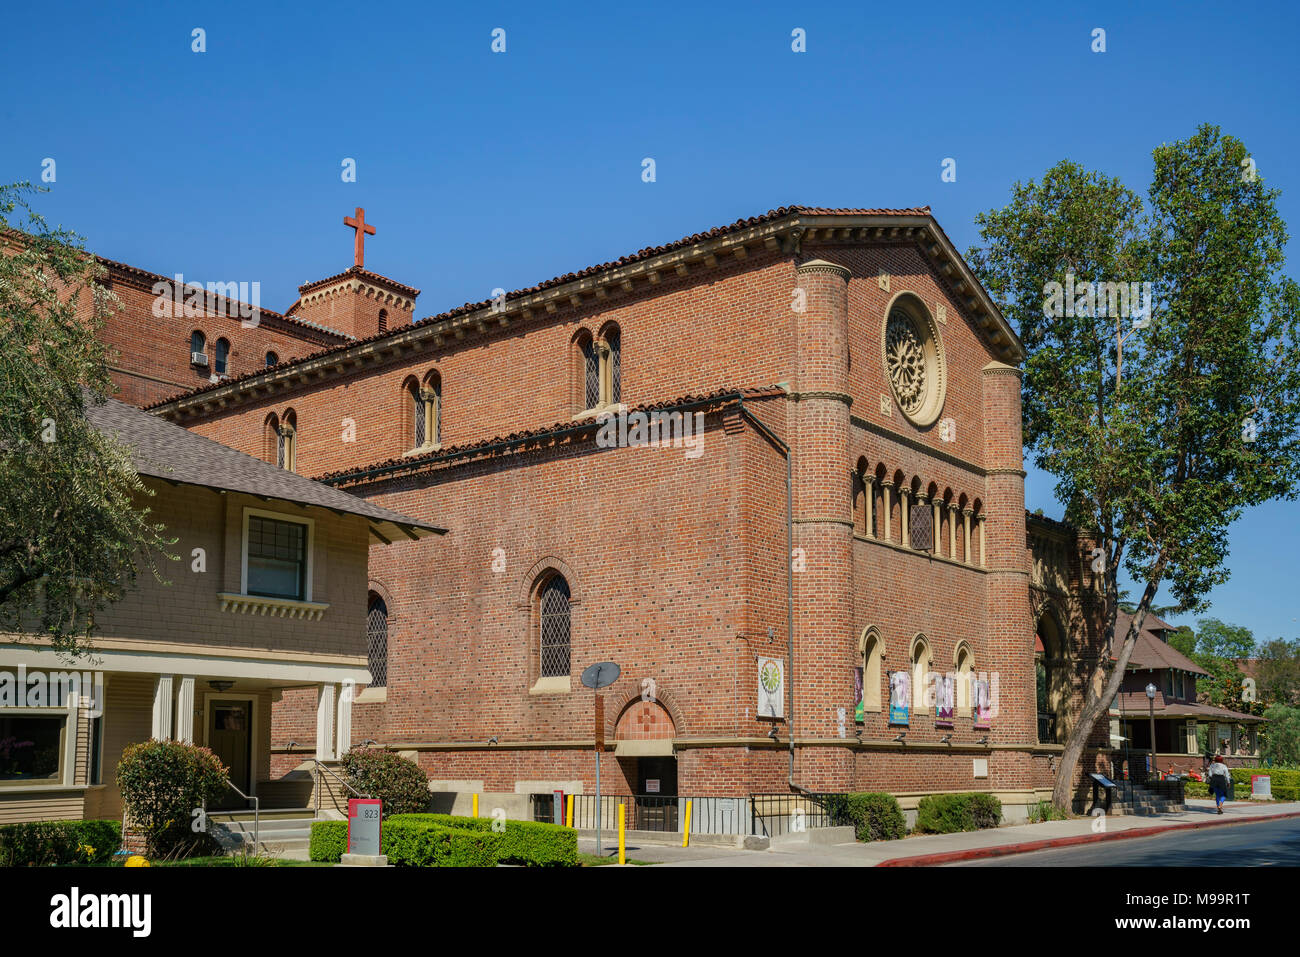 Los Angeles, JUN 23: Exterior view of the United University Church in USC on JUN 23, 2017 at Los Angeles, California Stock Photo